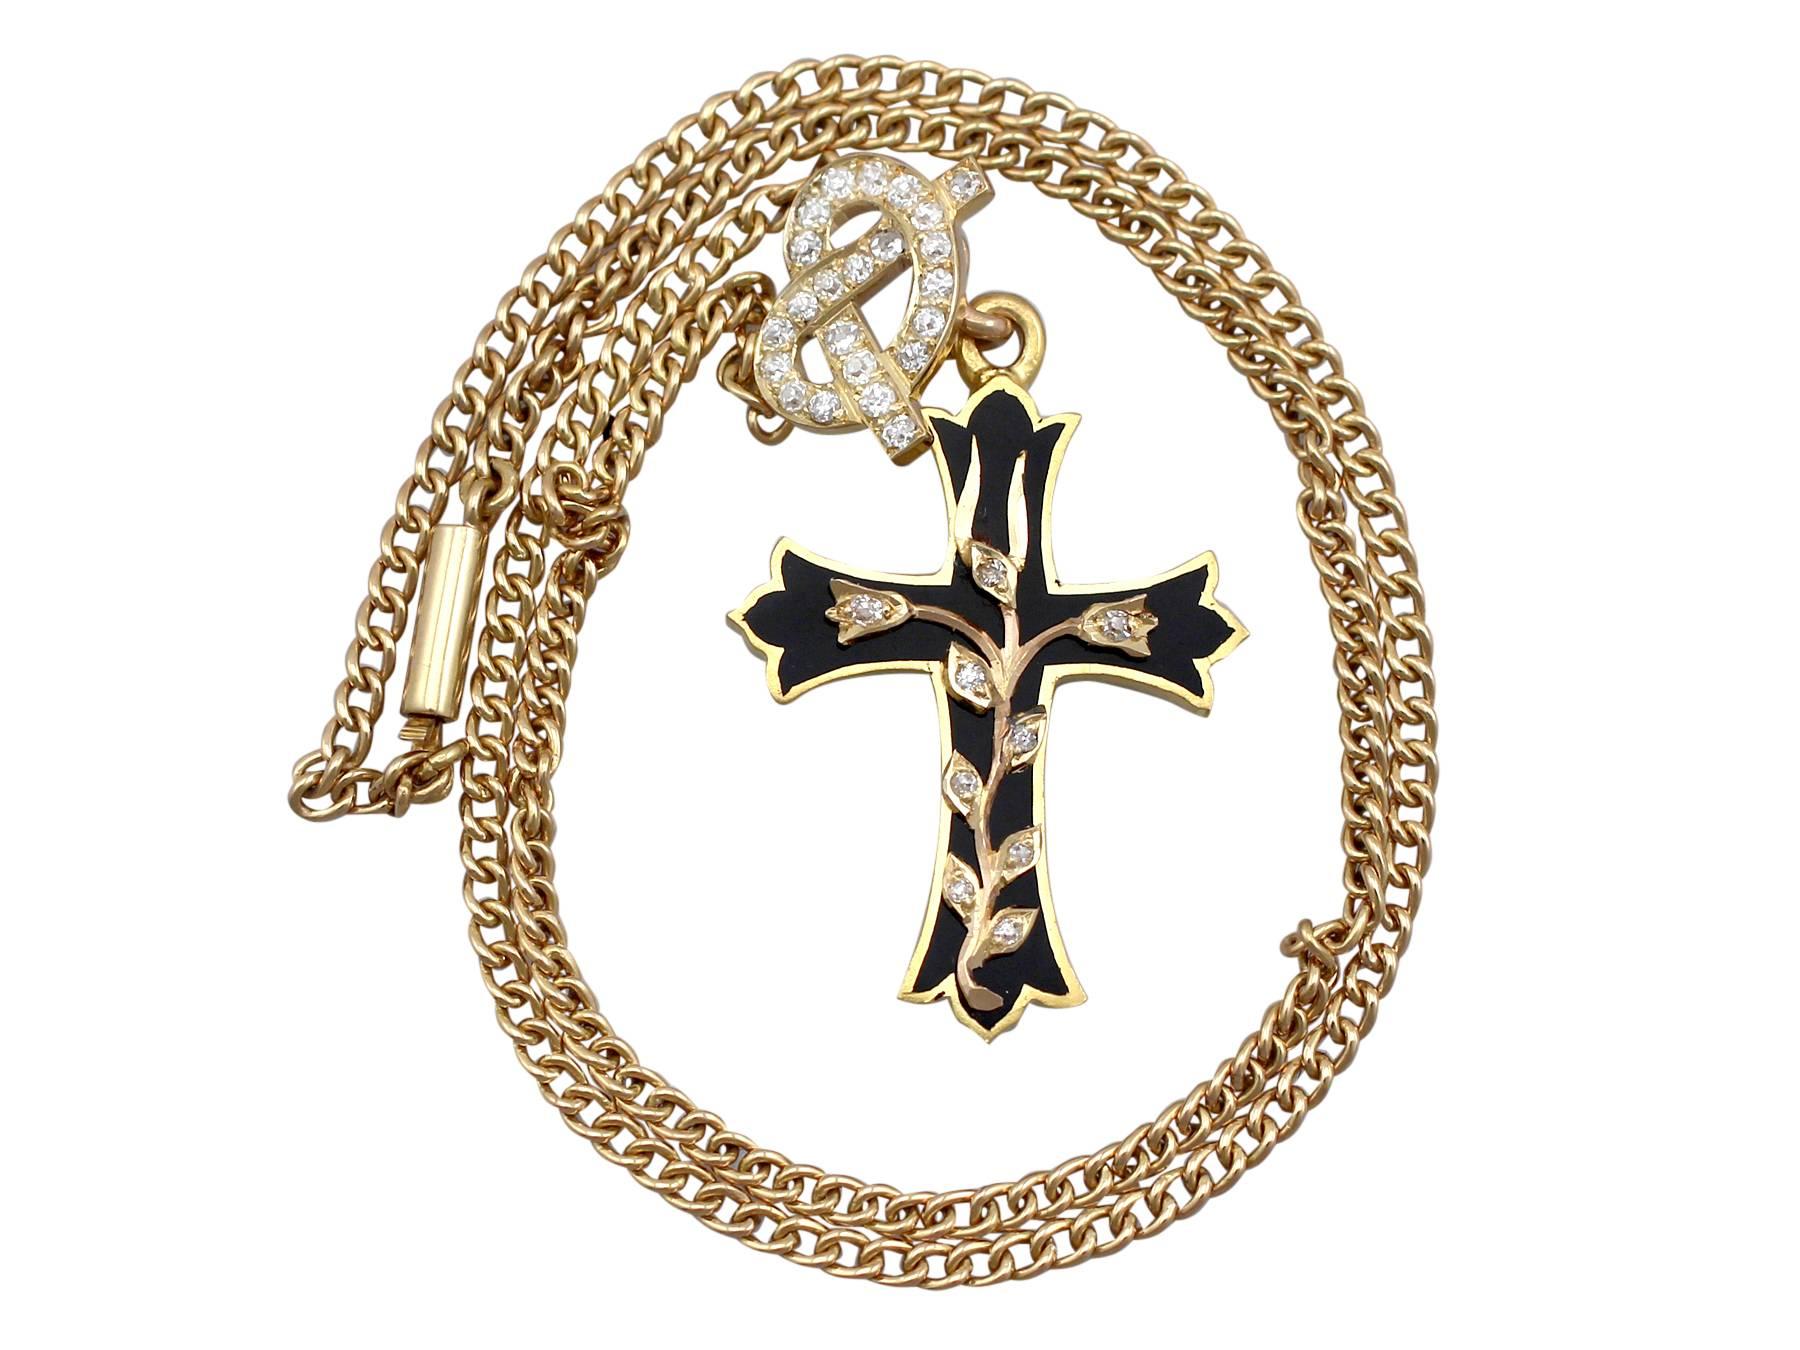 An exceptional Victorian 0.57 carat diamond and black onyx, 21 karat yellow gold cross pendant on 18 karat yellow gold chain; part of our diverse antique jewelry collections

The 21k yellow gold frame is fitted with an inset cross shaped black onyx